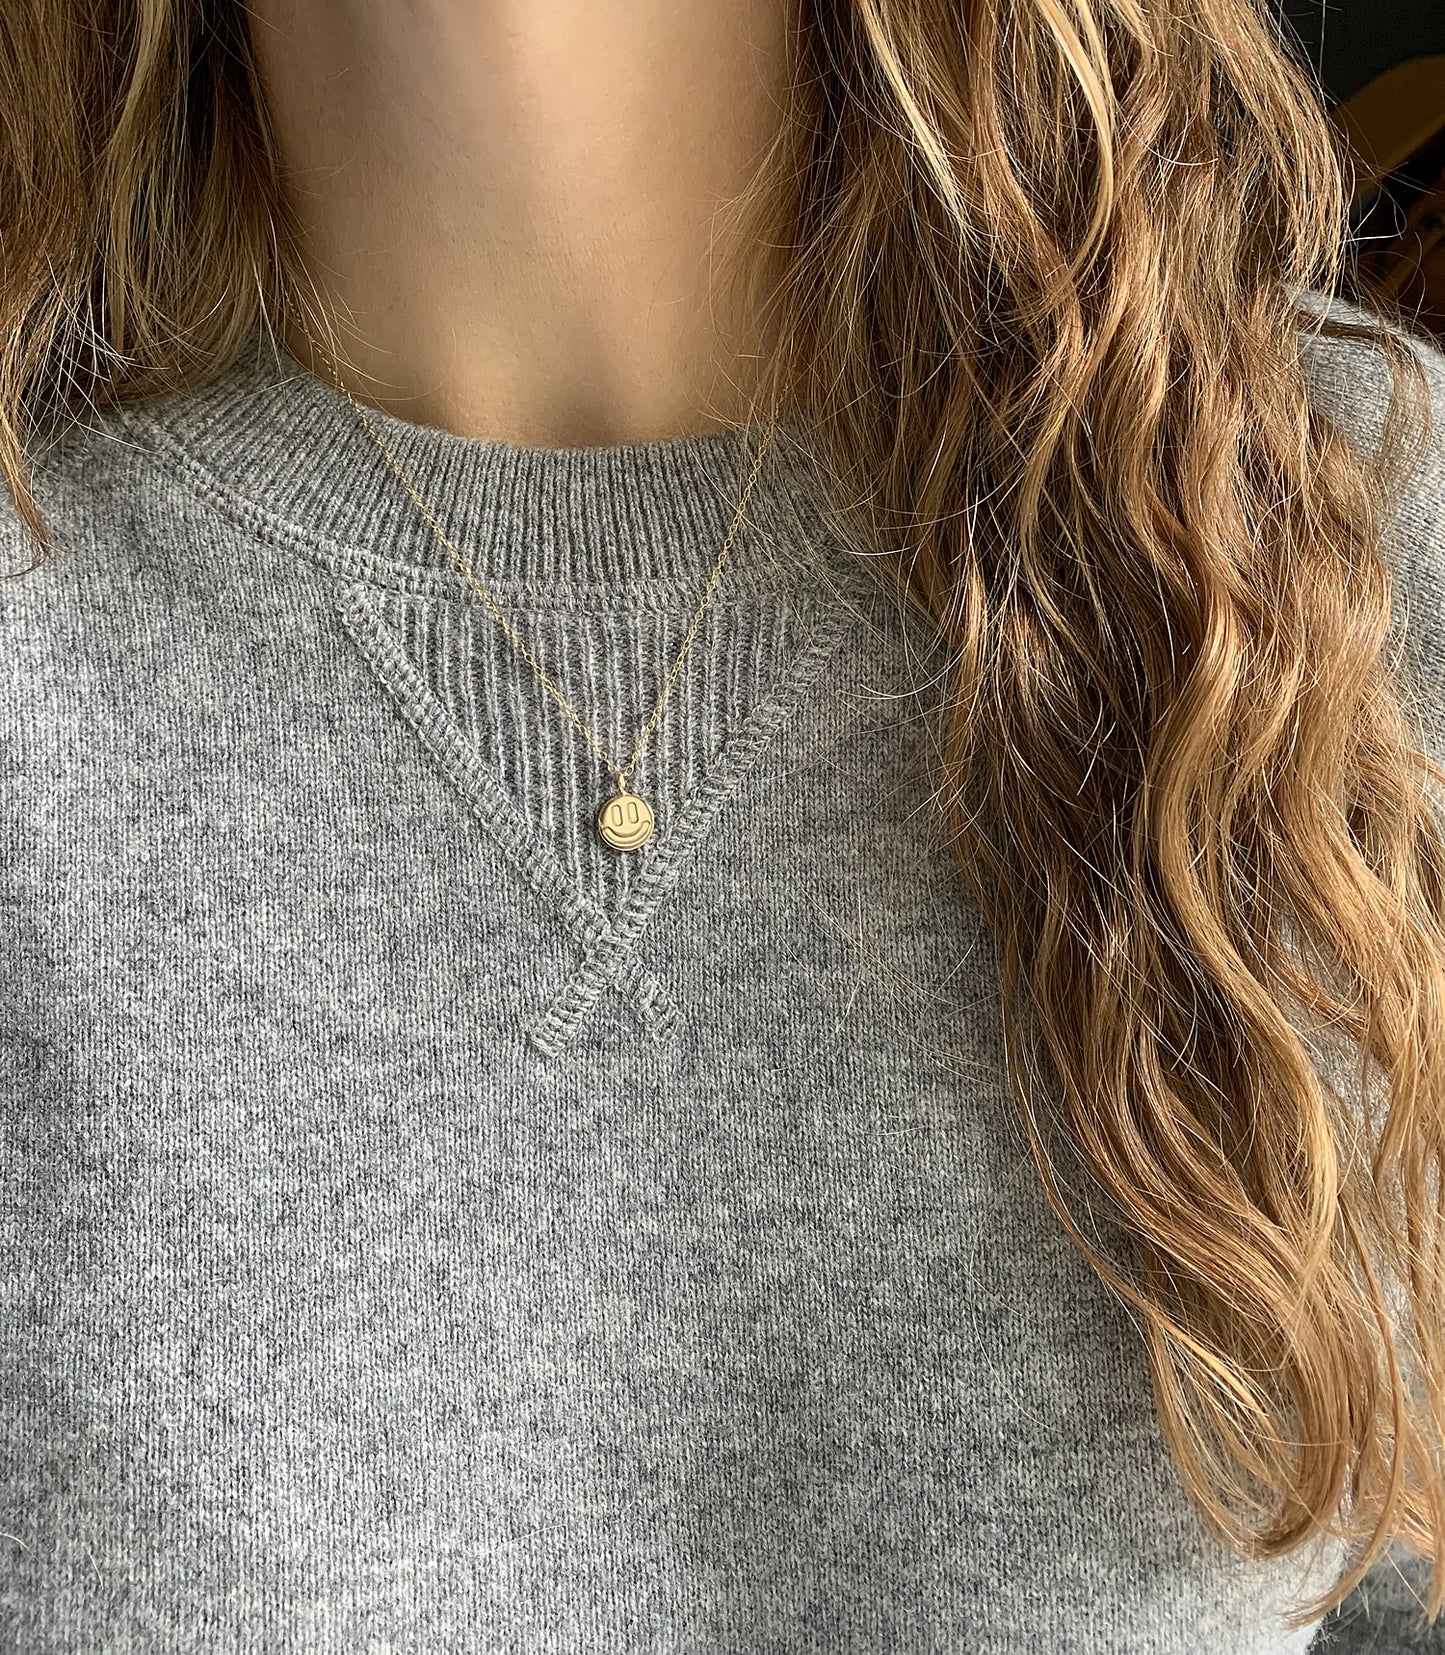 gold smile necklace on a person with a gray sweater